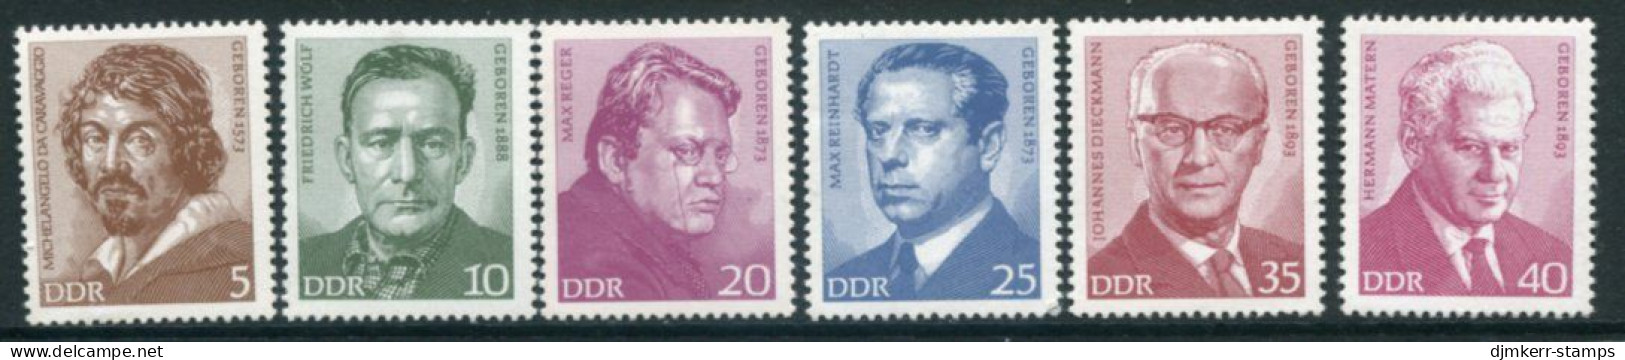 DDR / E. GERMANY 1973 Personalities MNH / **.  Michel 1815-19 - Unused Stamps